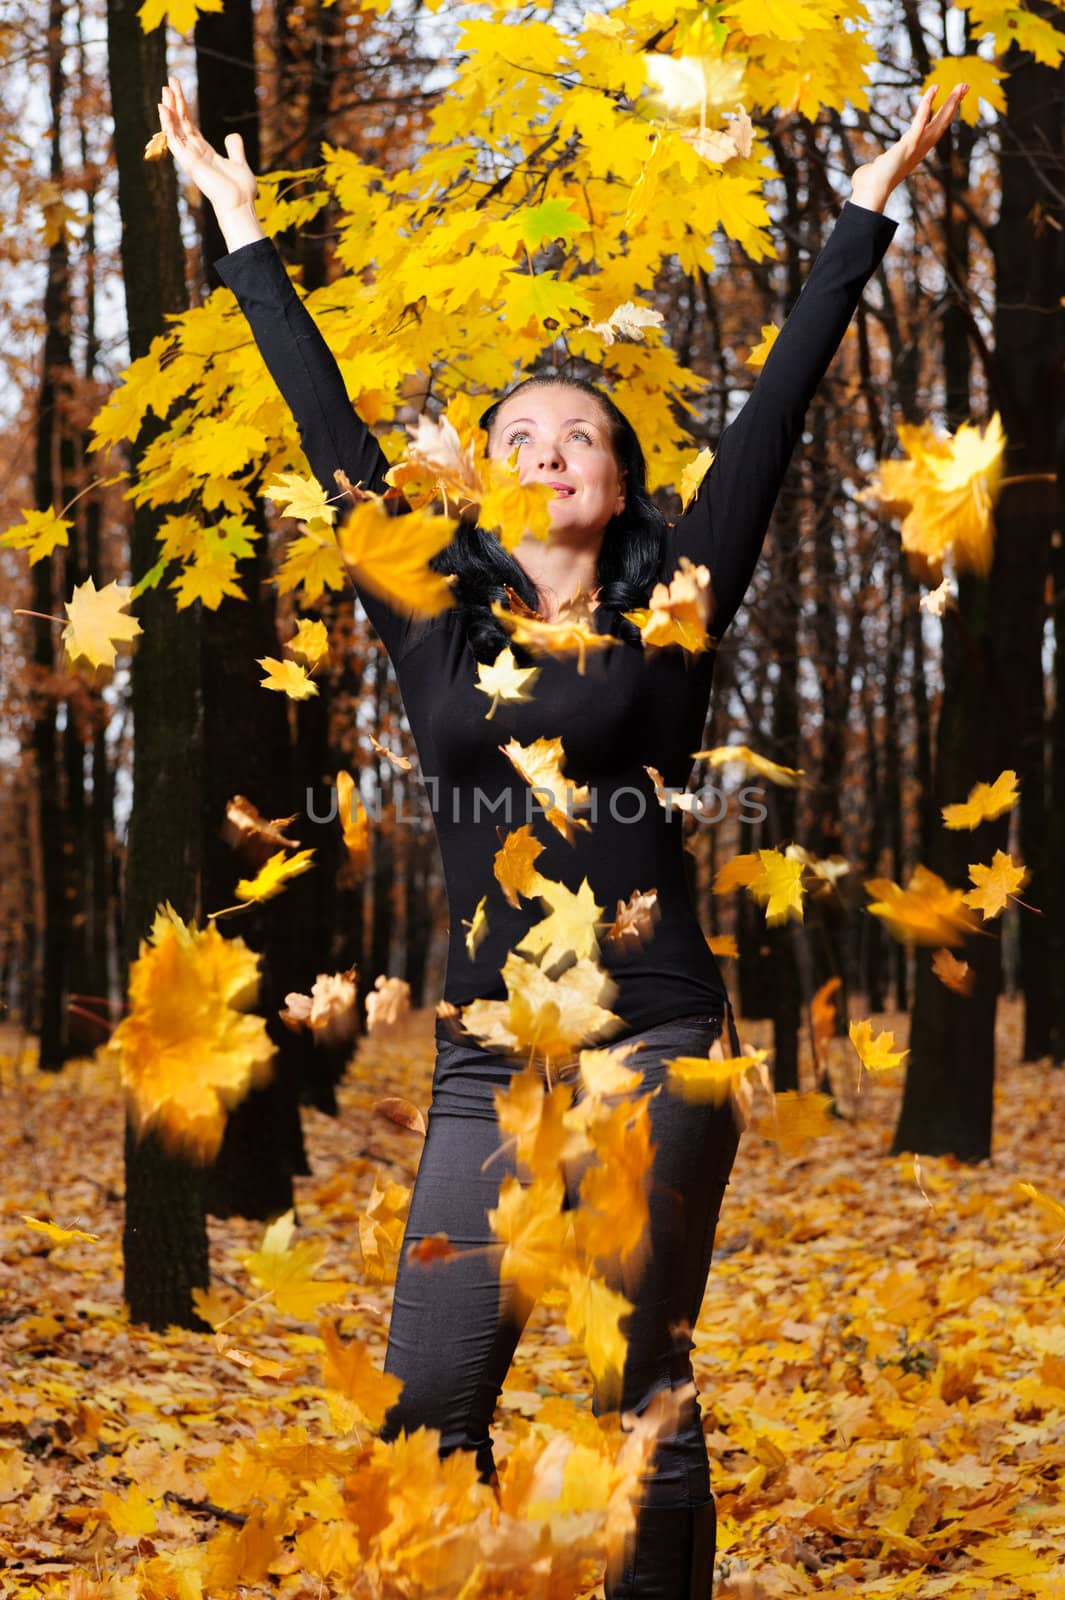 The women with the lifted hands autumn forest. Falling yellow leaf